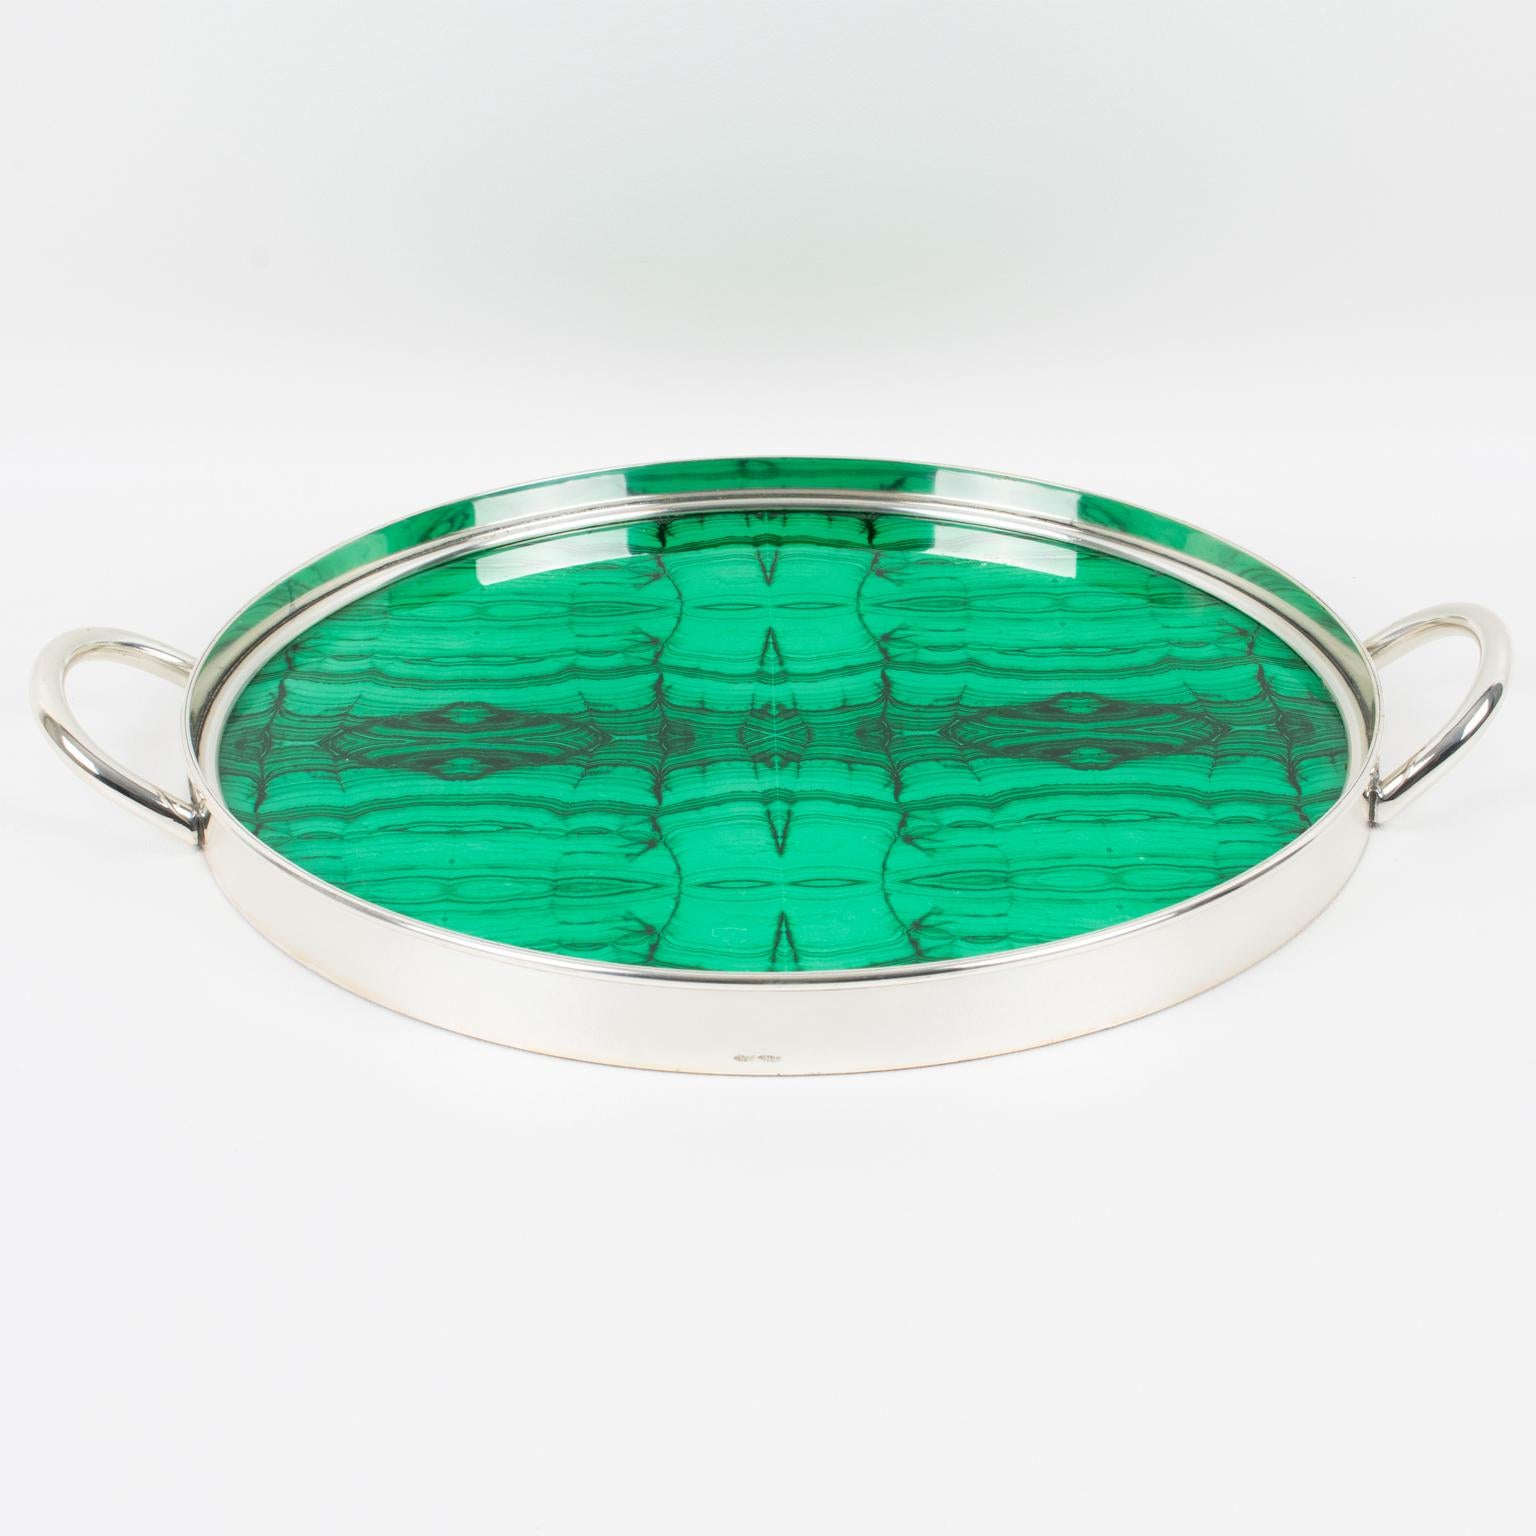 Italian Modernist Silver Plate and Malachite-like Serving Tray, 1970s 2